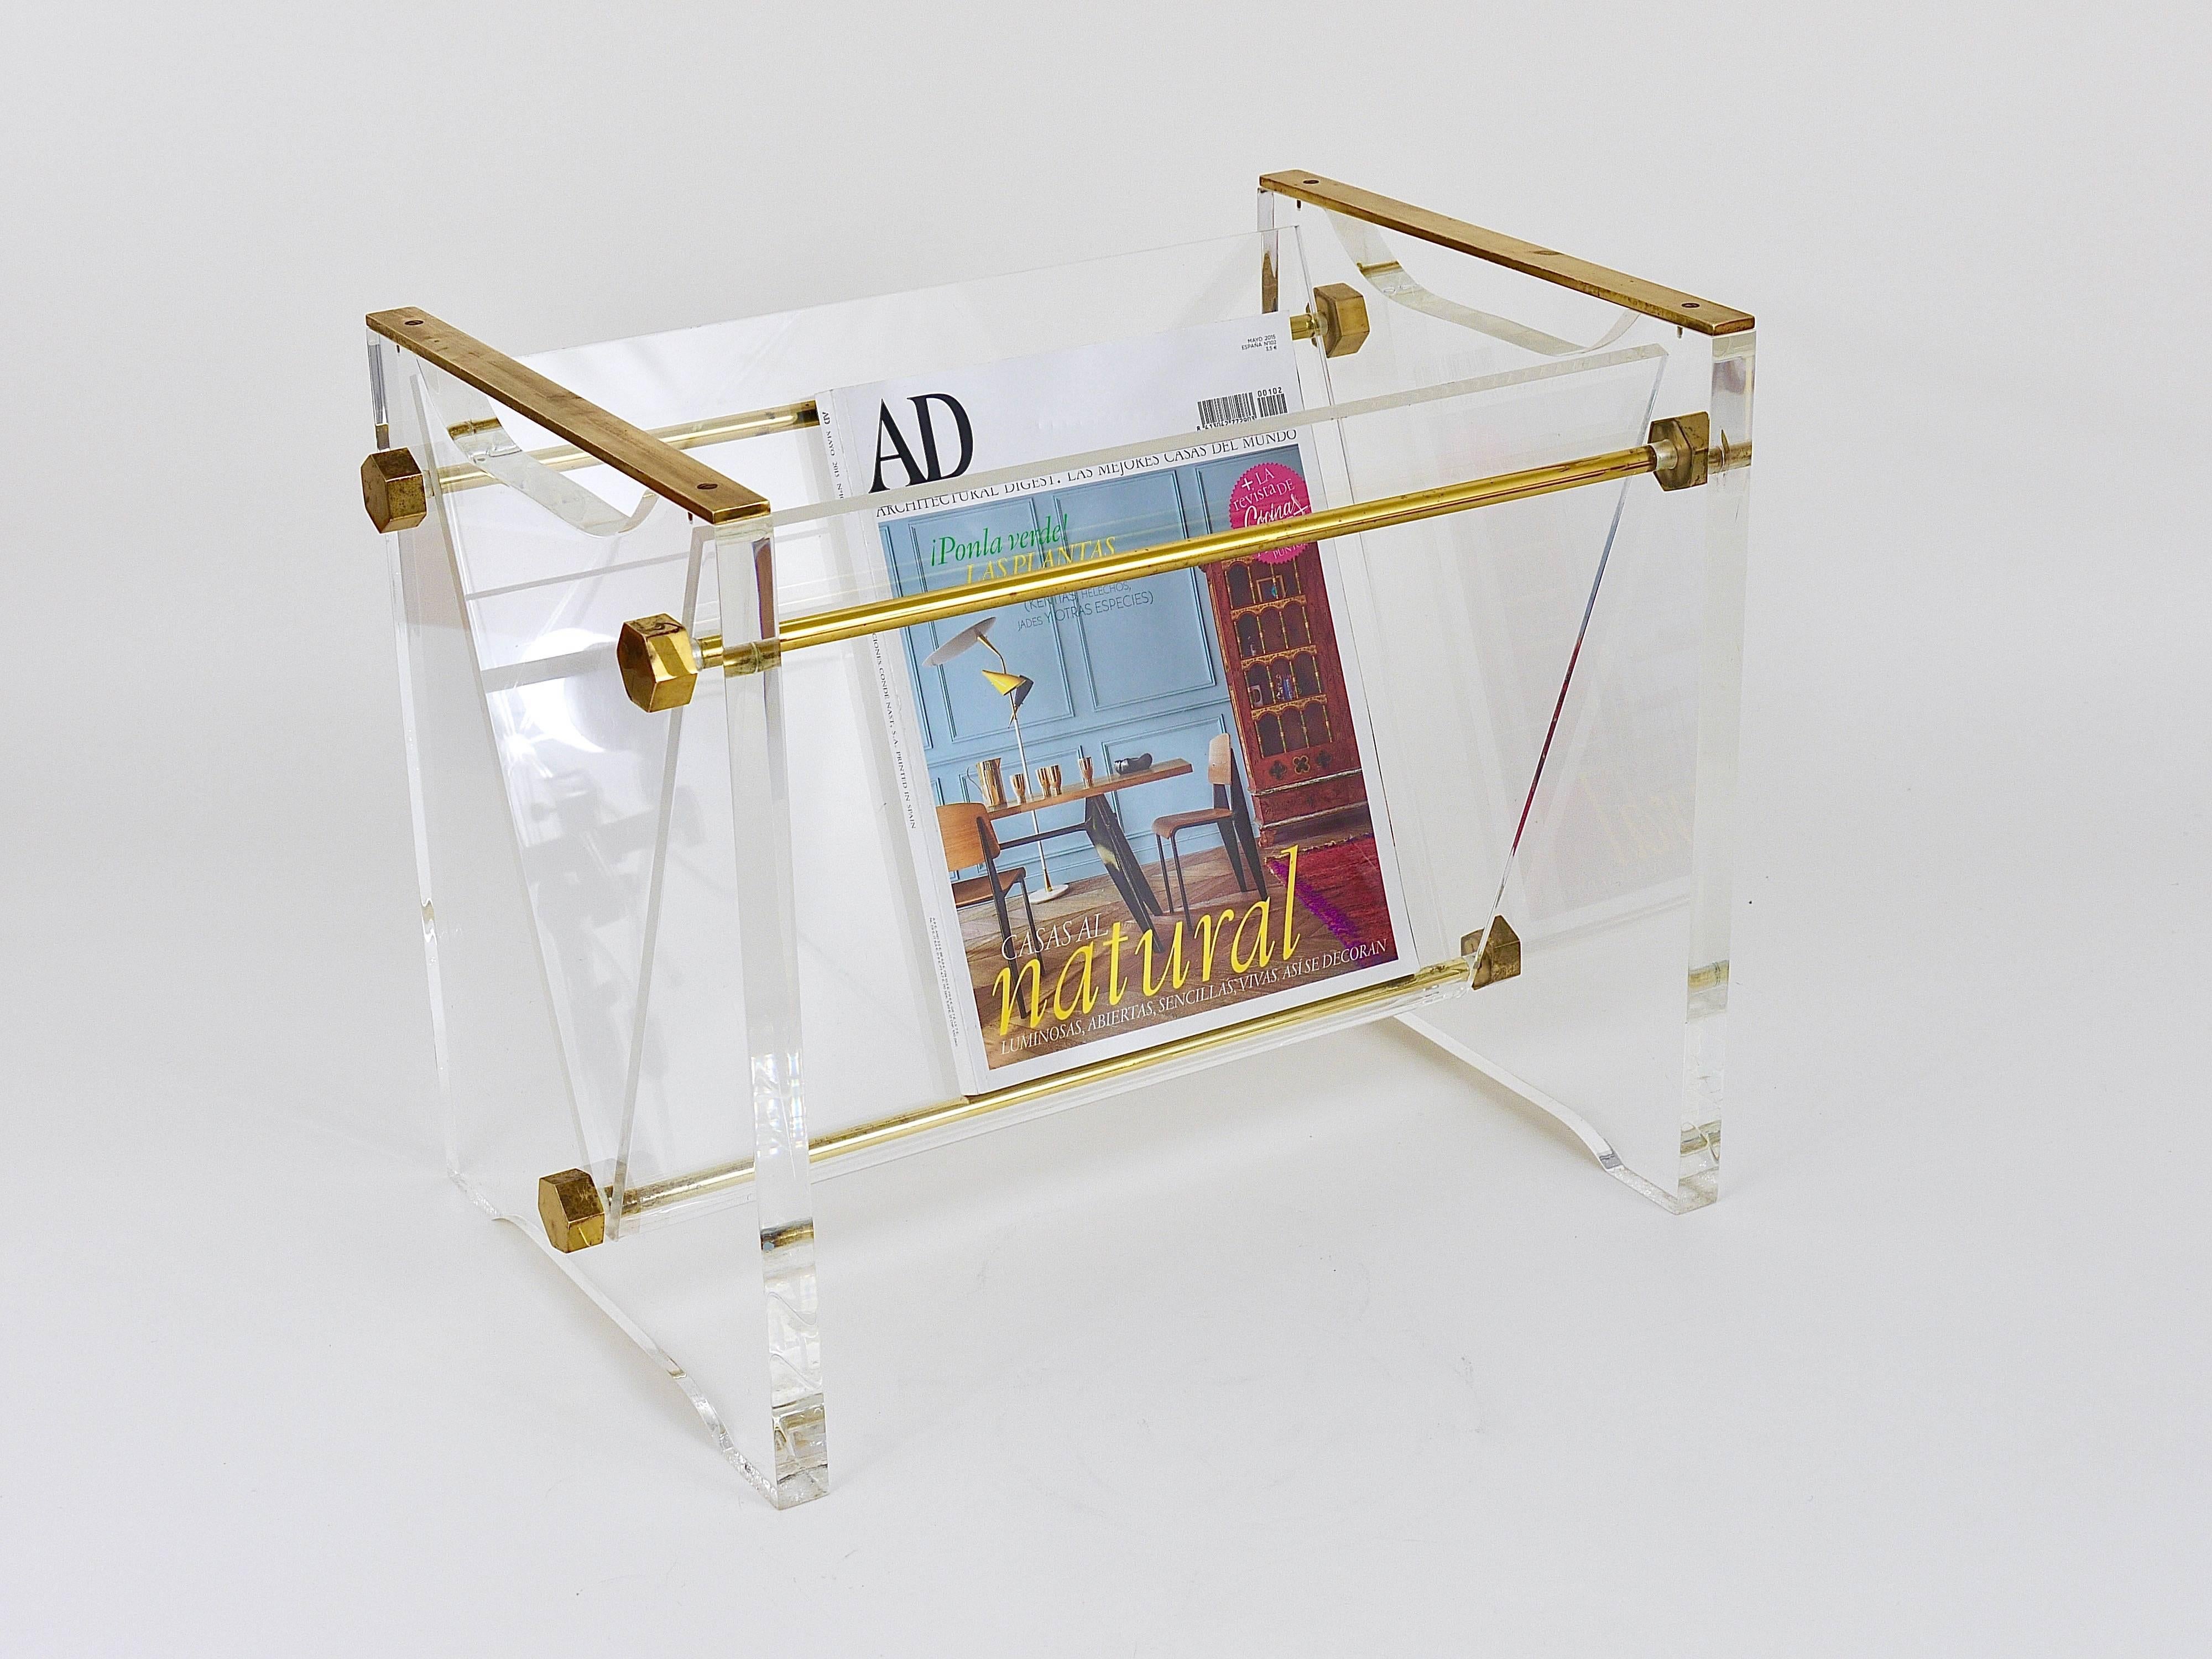 A beautiful and solid Italian midcentury magazine holder from the 1970s, made of clear perspex / plexiglass and brass. In very good condition with nice patina on the brass pieces.